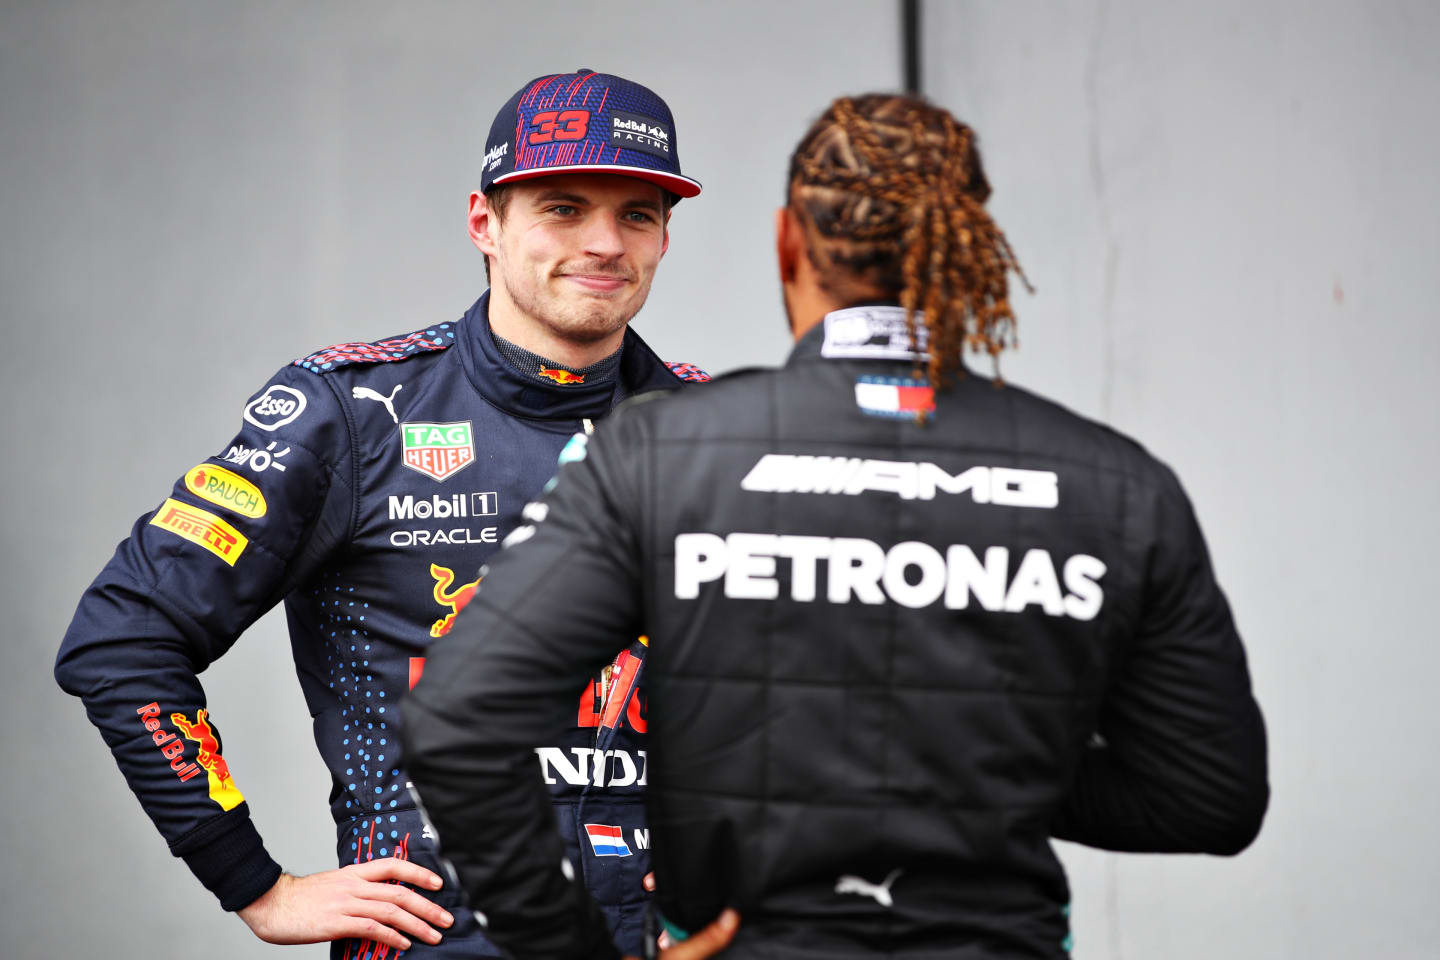 IMOLA, ITALY - APRIL 17: Third place qualifier Max Verstappen of Netherlands and Red Bull Racing talks with pole position qualifier Lewis Hamilton of Great Britain and Mercedes GP in parc ferme during qualifying ahead of the F1 Grand Prix of Emilia Romagna at Autodromo Enzo e Dino Ferrari on April 17, 2021 in Imola, Italy. (Photo by Mark Thompson/Getty Images)